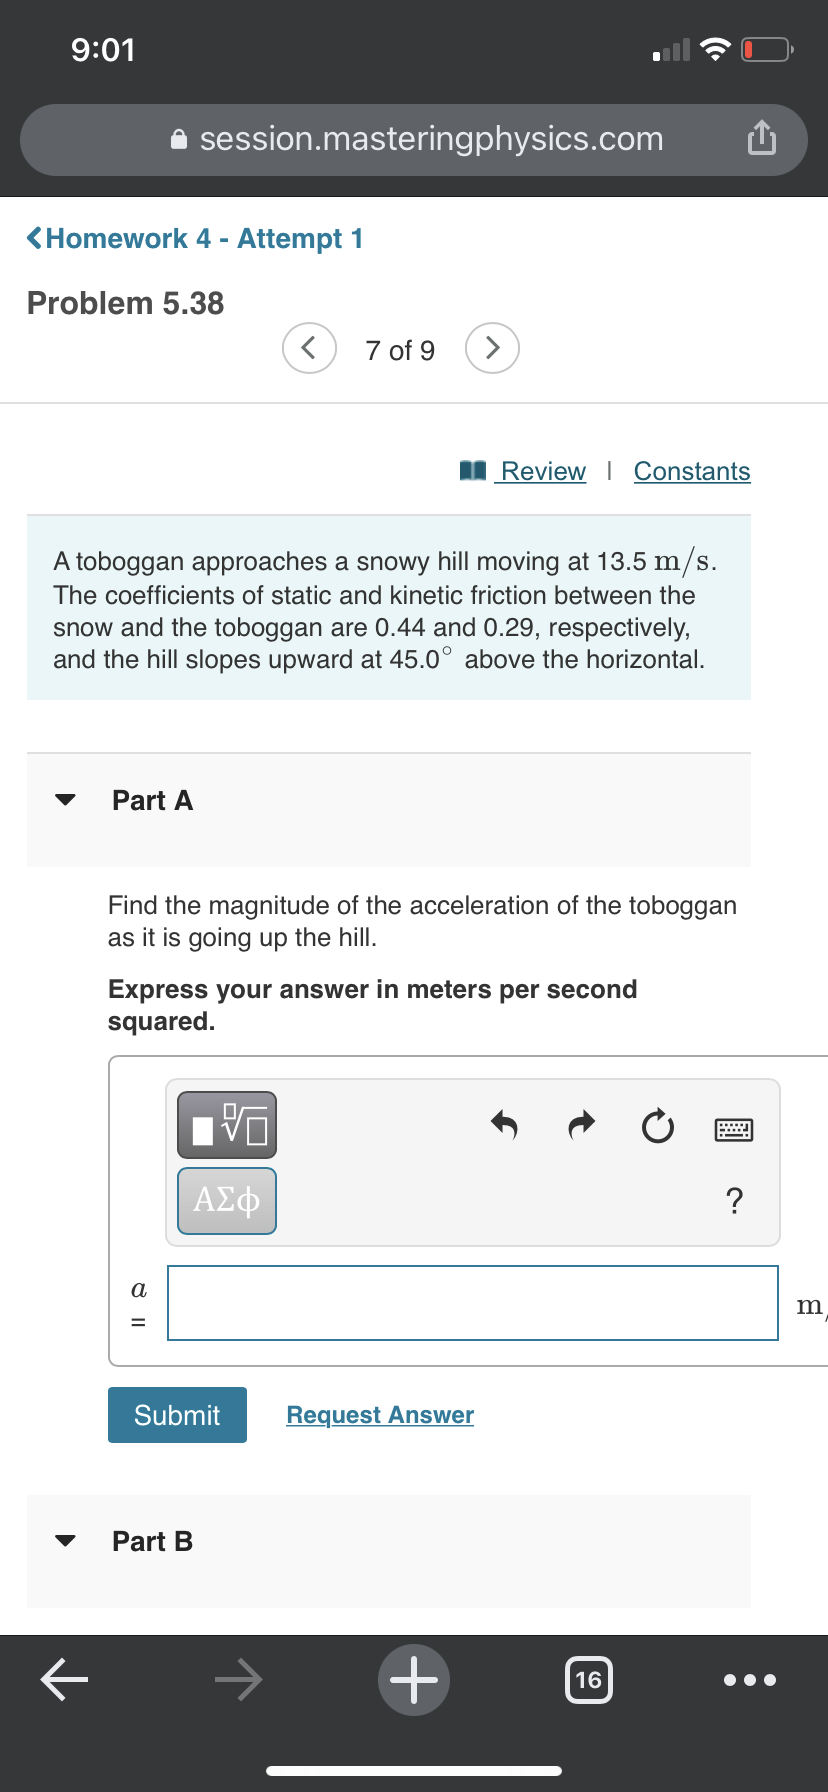 9:01
A session.masteringphysics.com
<Homework 4 - Attempt 1
Problem 5.38
7 of 9
>
I Review | Constants
A toboggan approaches a snowy hill moving at 13.5 m/s.
The coefficients of static and kinetic friction between the
snow and the toboggan are 0.44 and 0.29, respectively,
and the hill slopes upward at 45.0° above the horizontal.
Part A
Find the magnitude of the acceleration of the toboggan
as it is going up the hill.
Express your answer in meters per second
squared.
ΑΣφ
a
Submit
Request Answer
Part B
->
16
